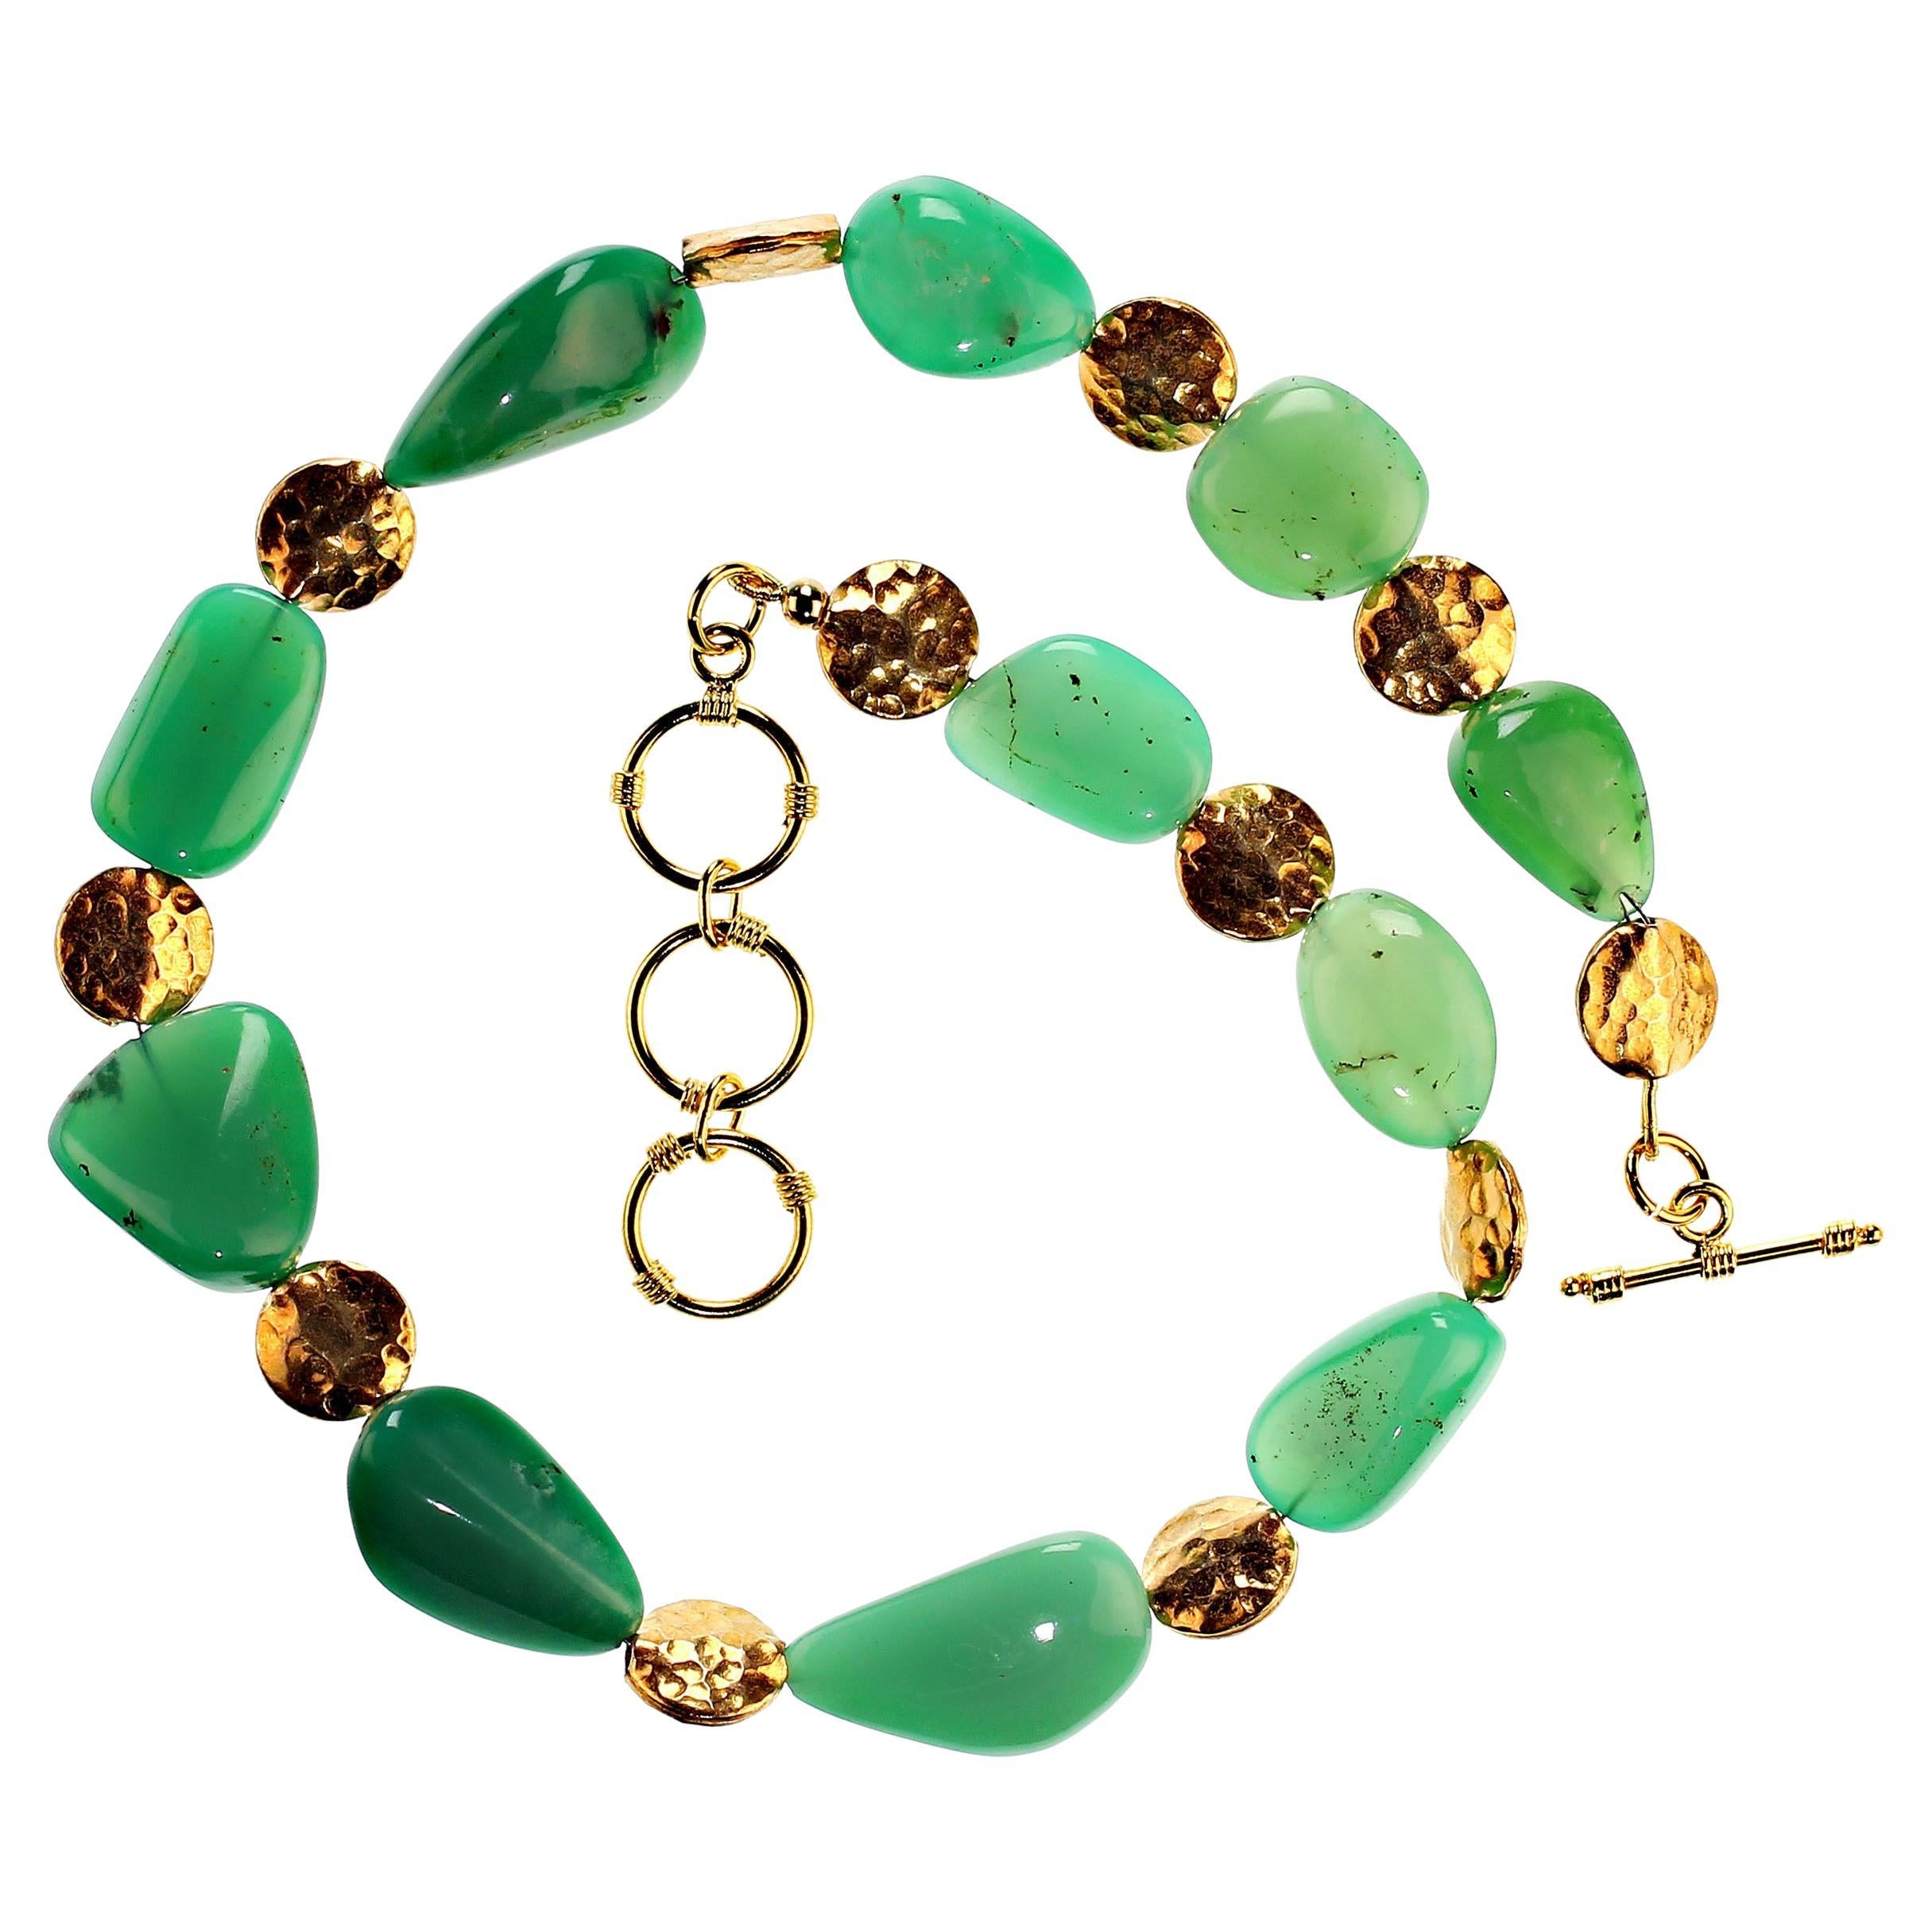 18 Inch necklace of gorgeous slightly graduated highly polished green chrysoprase nuggets accented with goldy round hammered discs.  This lovely necklace is secured with a gold-plate three ring toggle clasp. MN2345